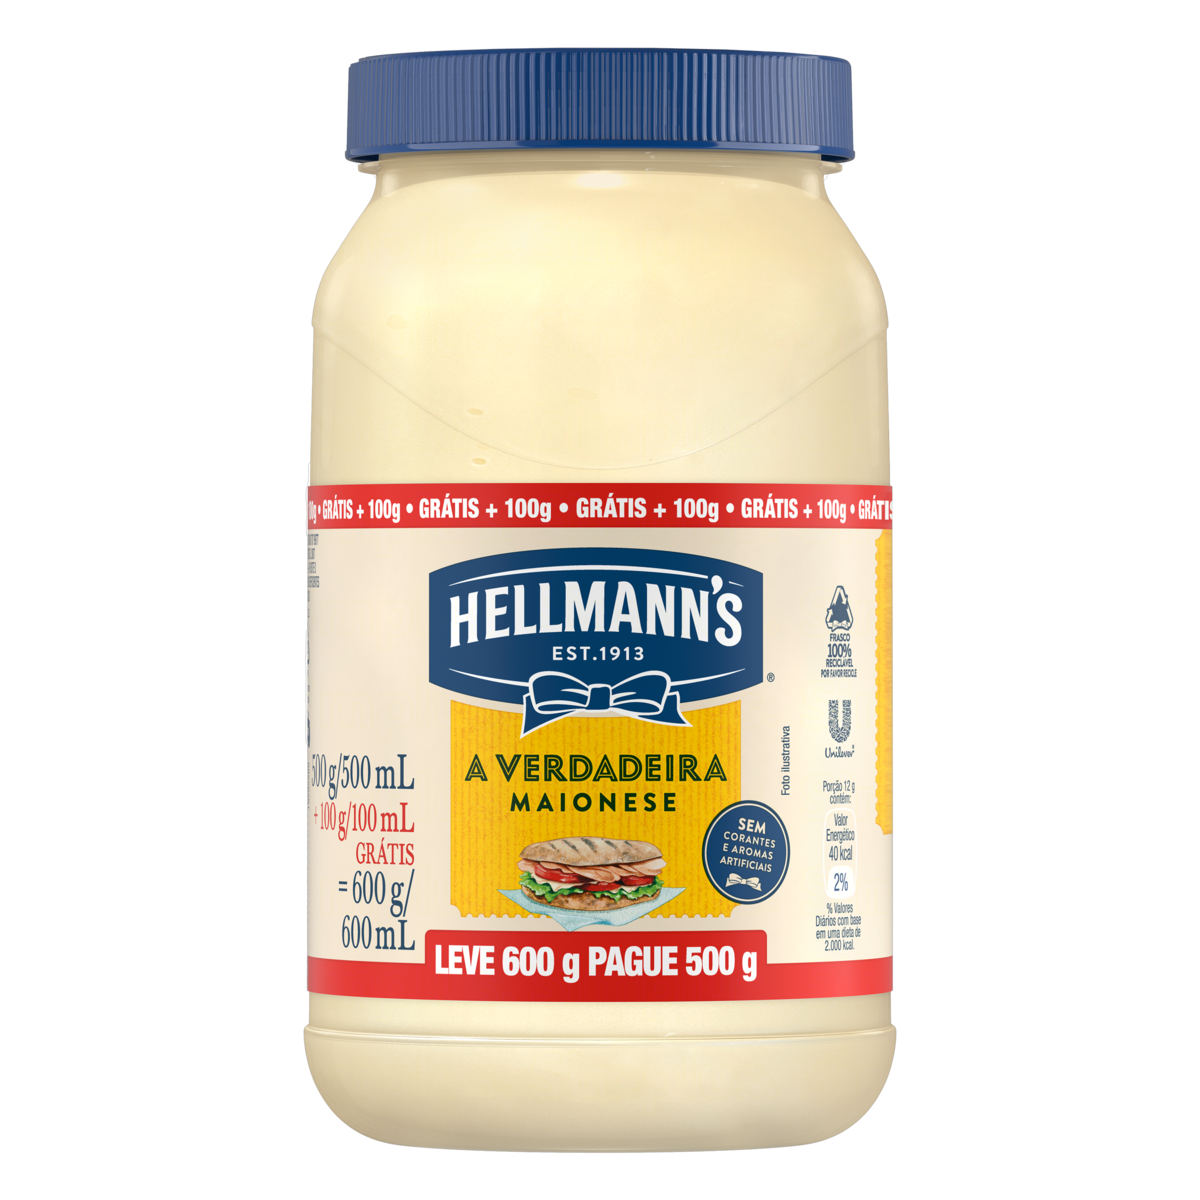 7891150072053 - MAIONESE HELLMANNS POTE LEVE 600G PAGUE 500G